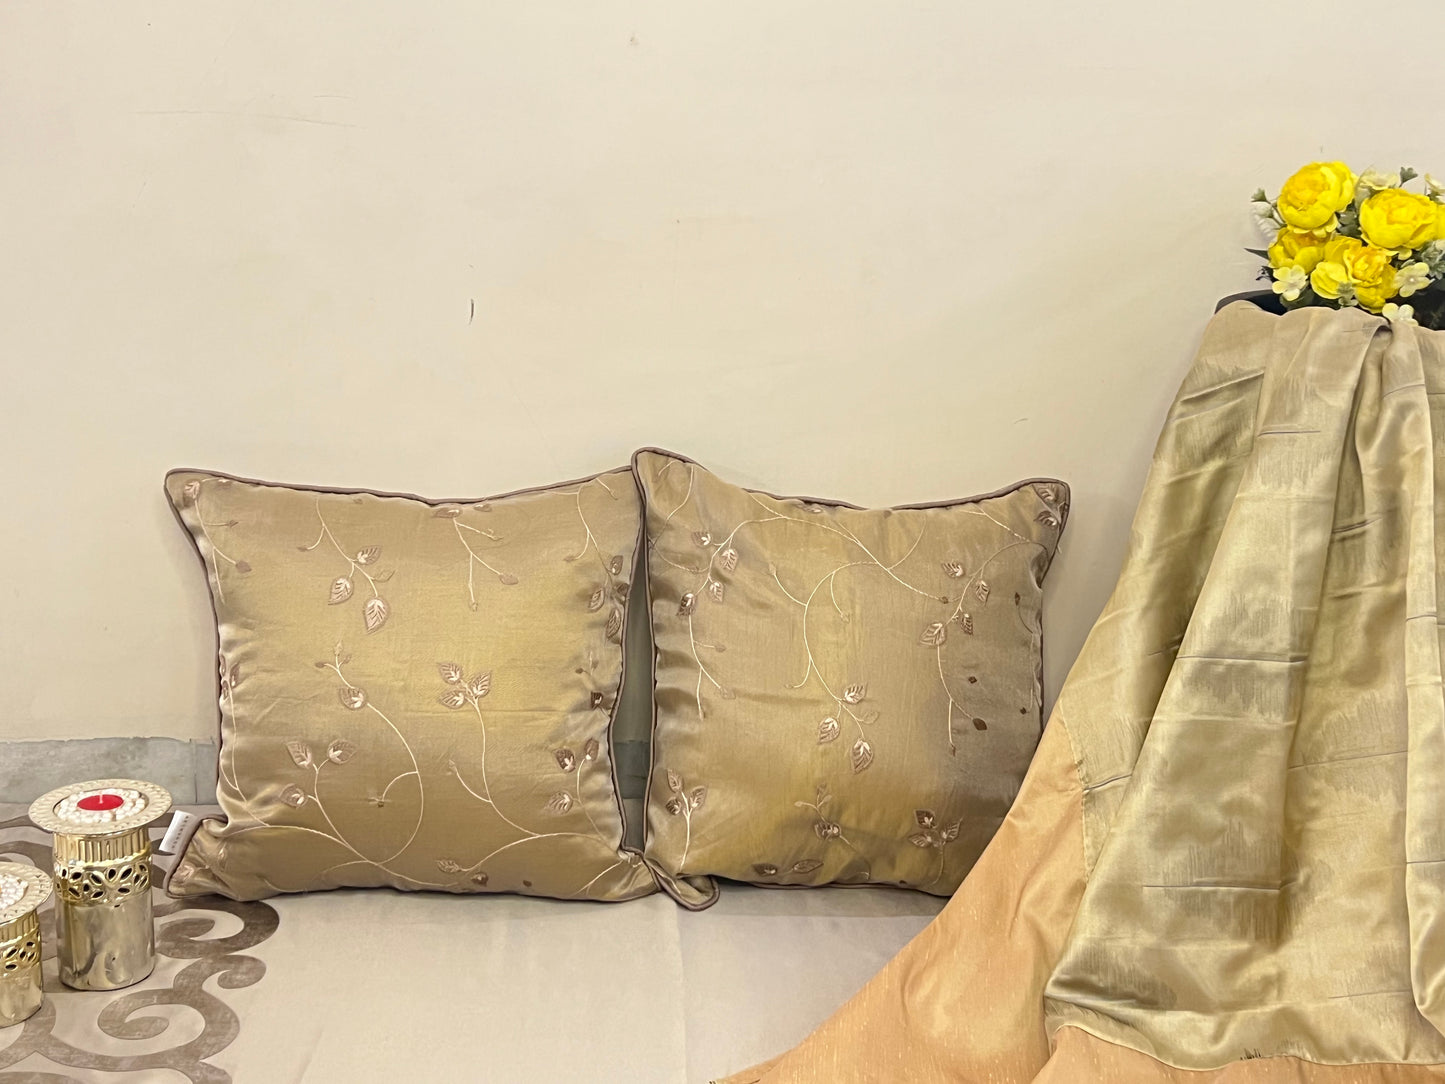 Foliage Cushion Cover Sets at Kamakhyaa by Aetherea. This item is Cushion covers, Home, Leaf, Metallic, Satin, Sheer, Upcycled